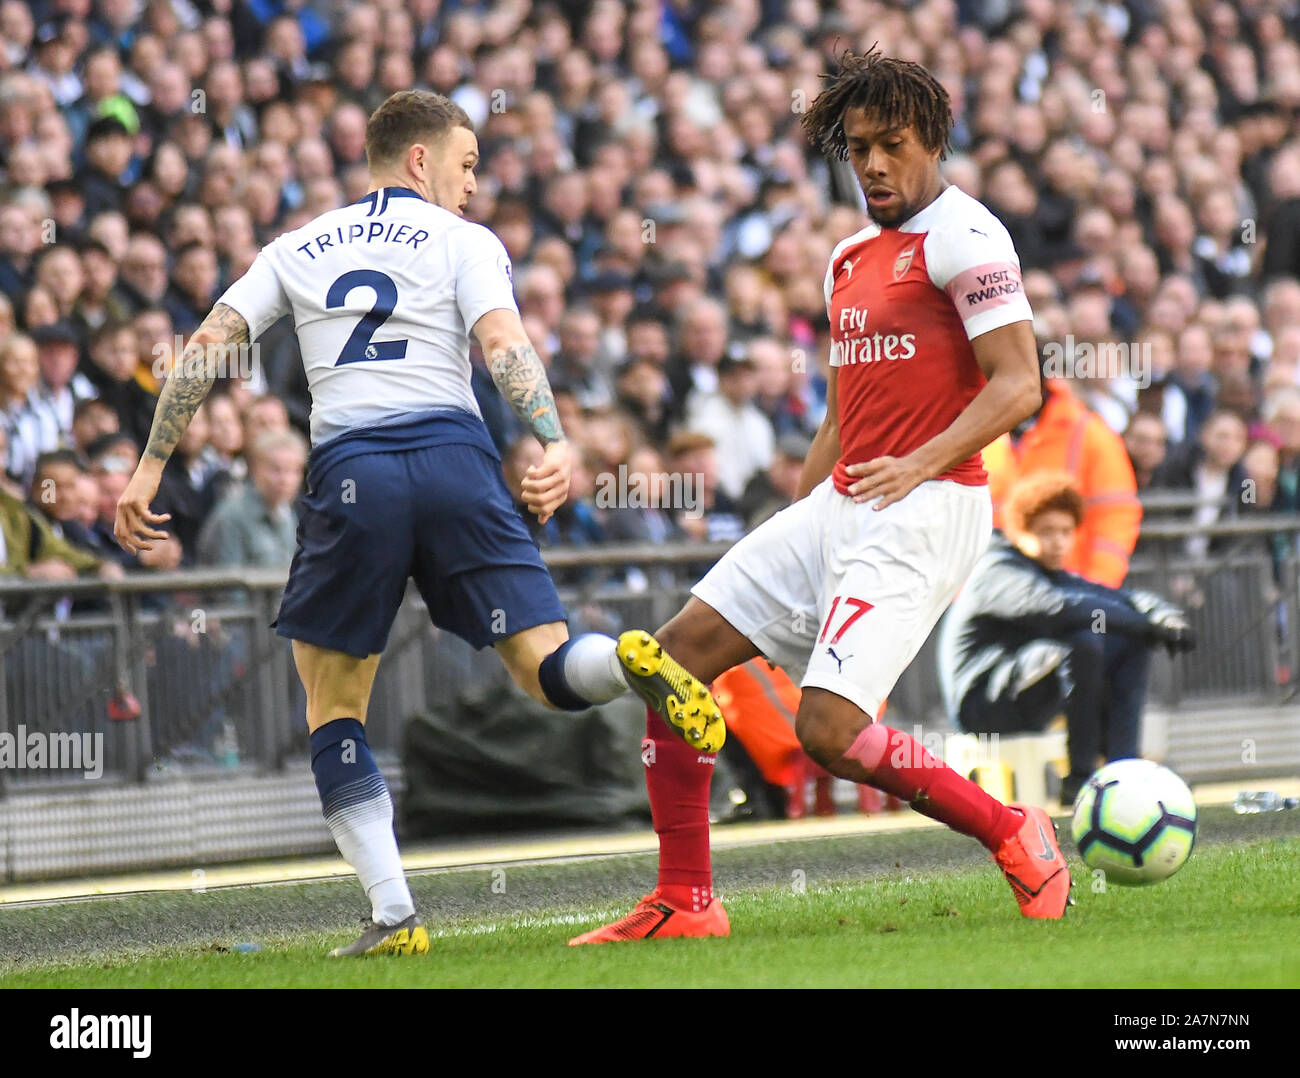 LONDON, ENGLAND - MARCH 2, 2019: Alex Iwobi of Arsenal pictured during the 2018/19 Premier League game between Tottenham Hotspur and Arsenal FC at Wembley Stadium. Stock Photo